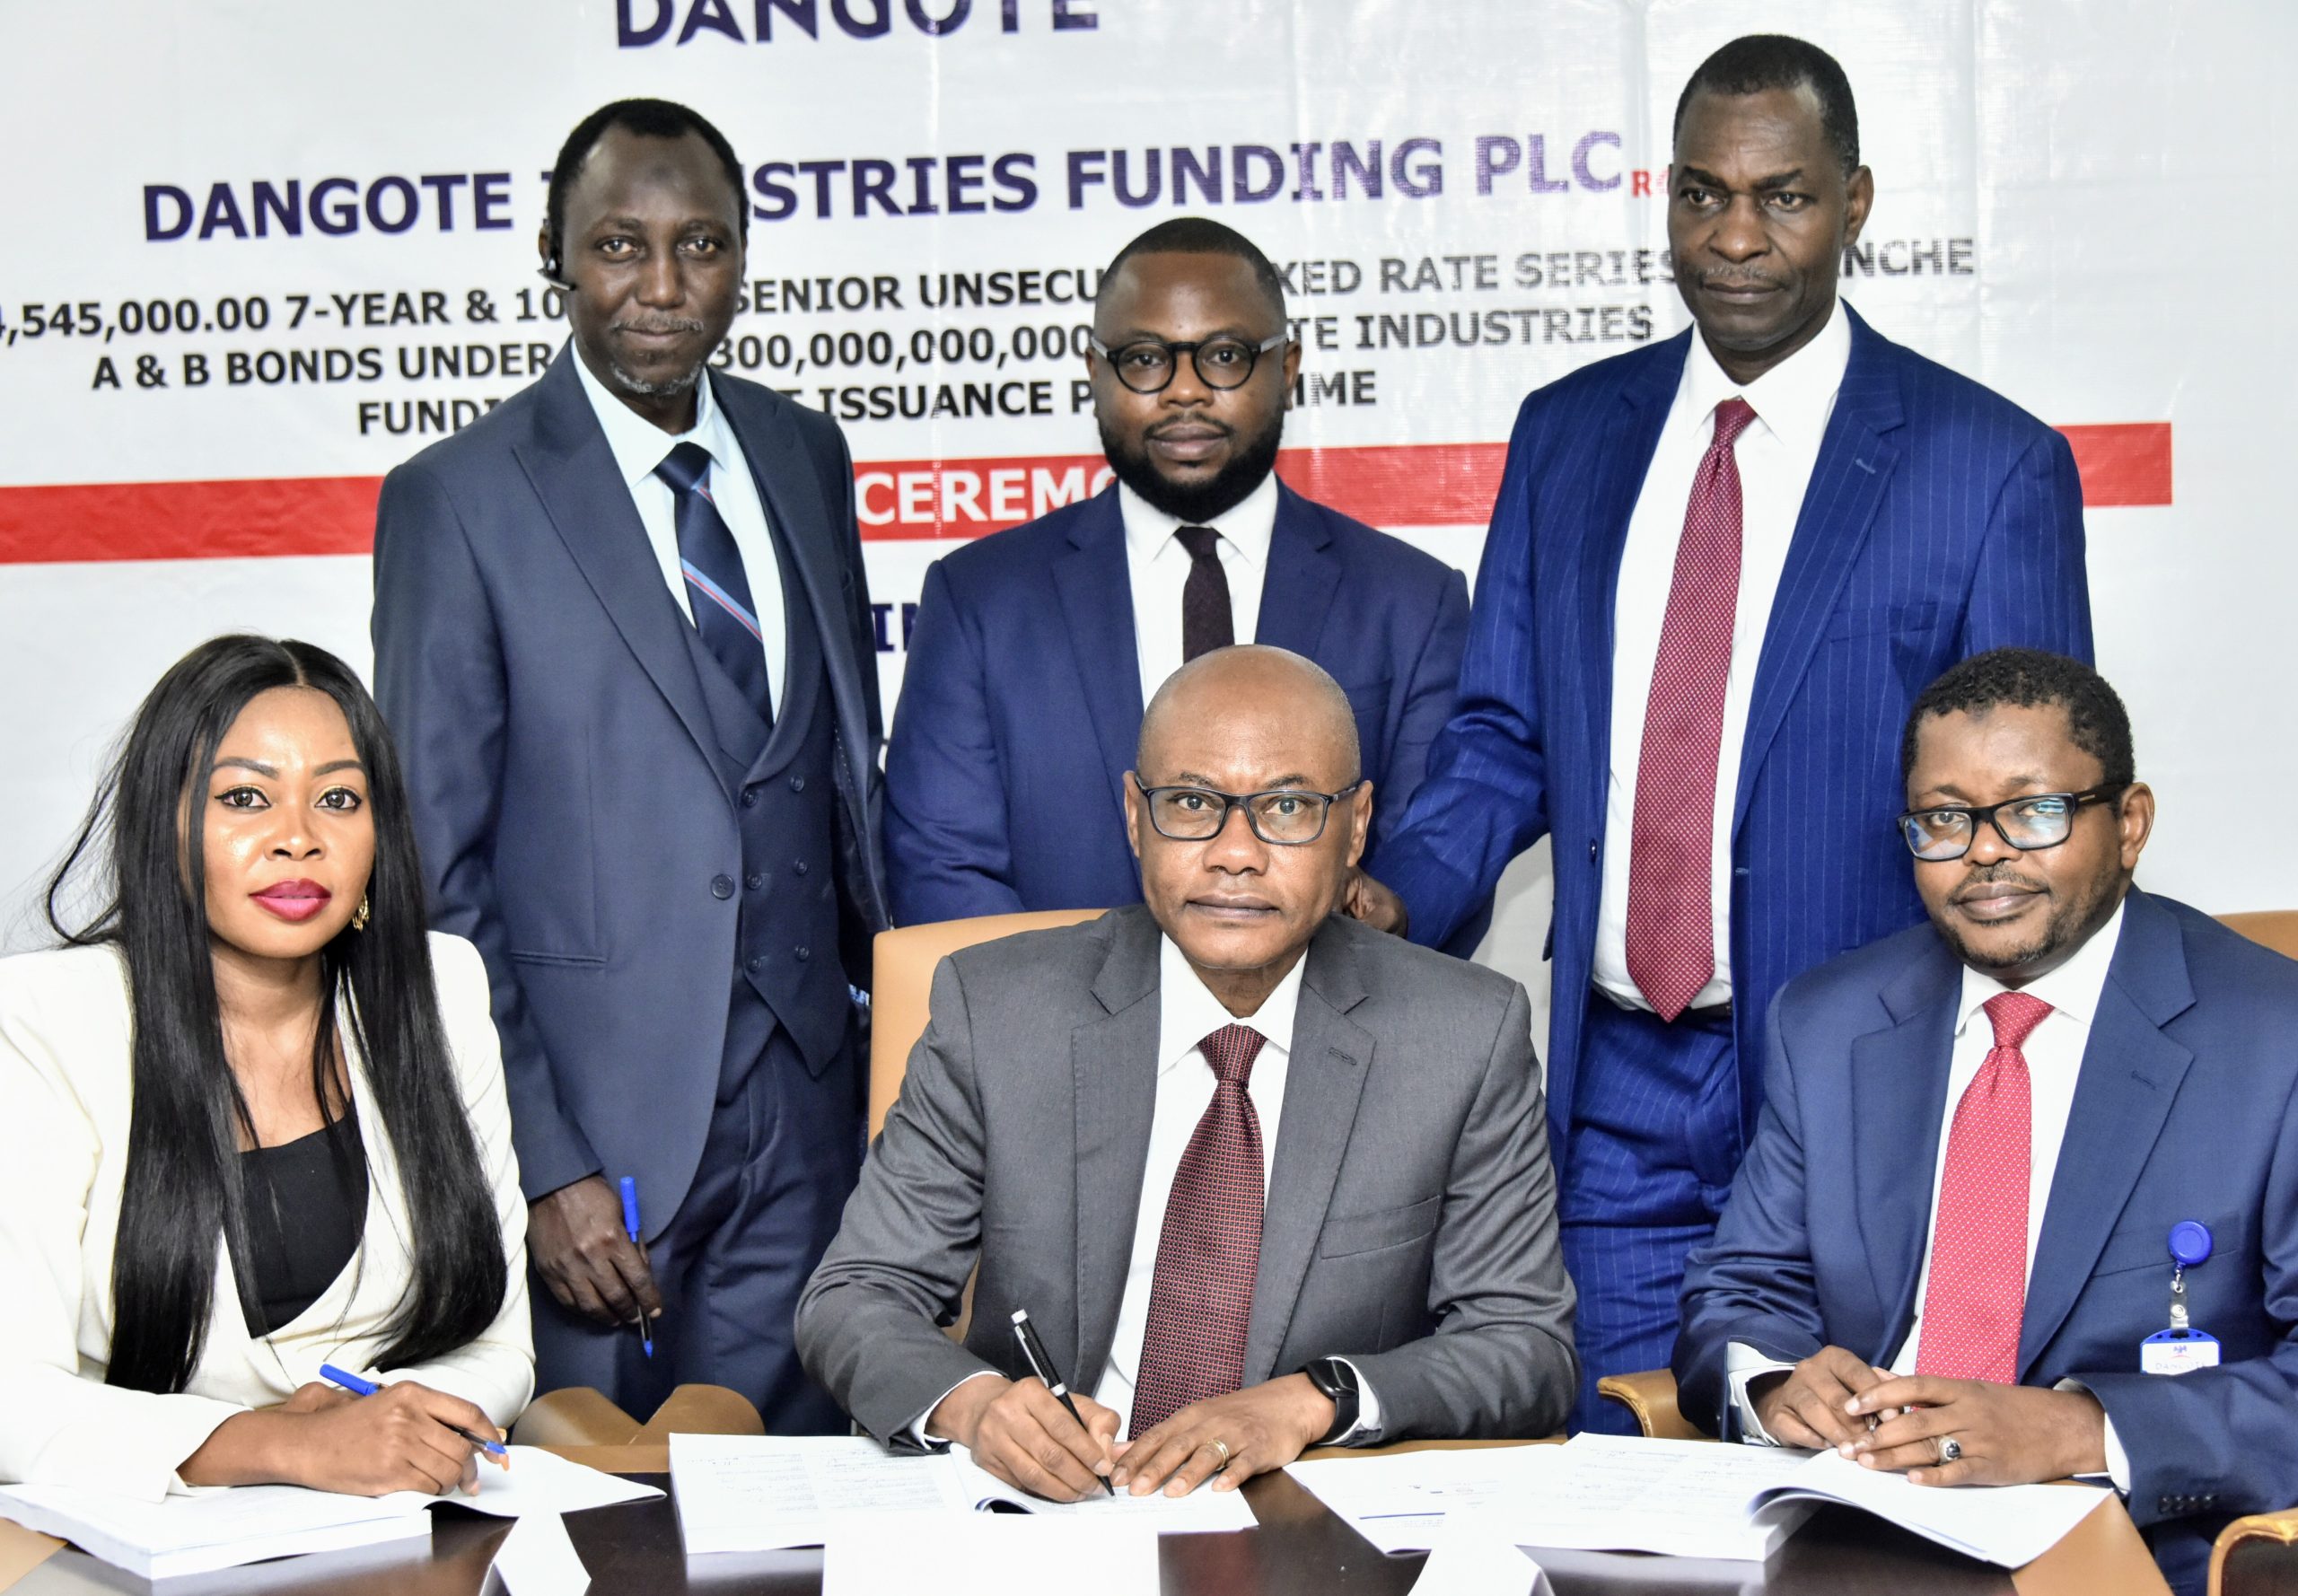 Dangote Industries completes issuance of N187bn series 1 fixed rate senior unsecured bond, marking Nigeria’s largest corporate bond issuance